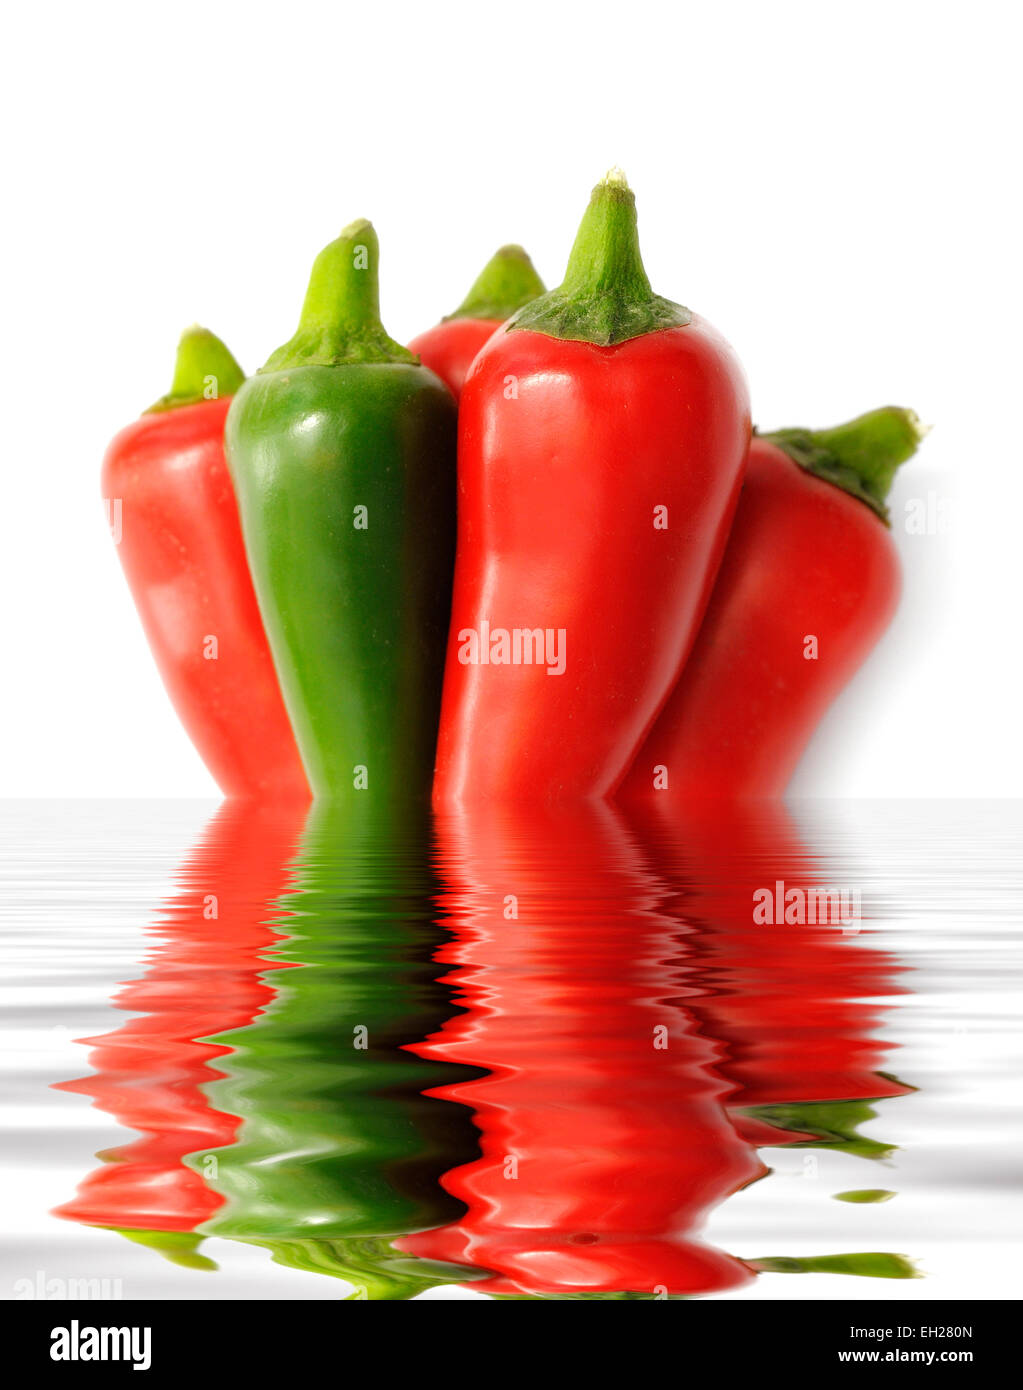 Mixed chili peppers in a digitally created pool of water Stock Photo